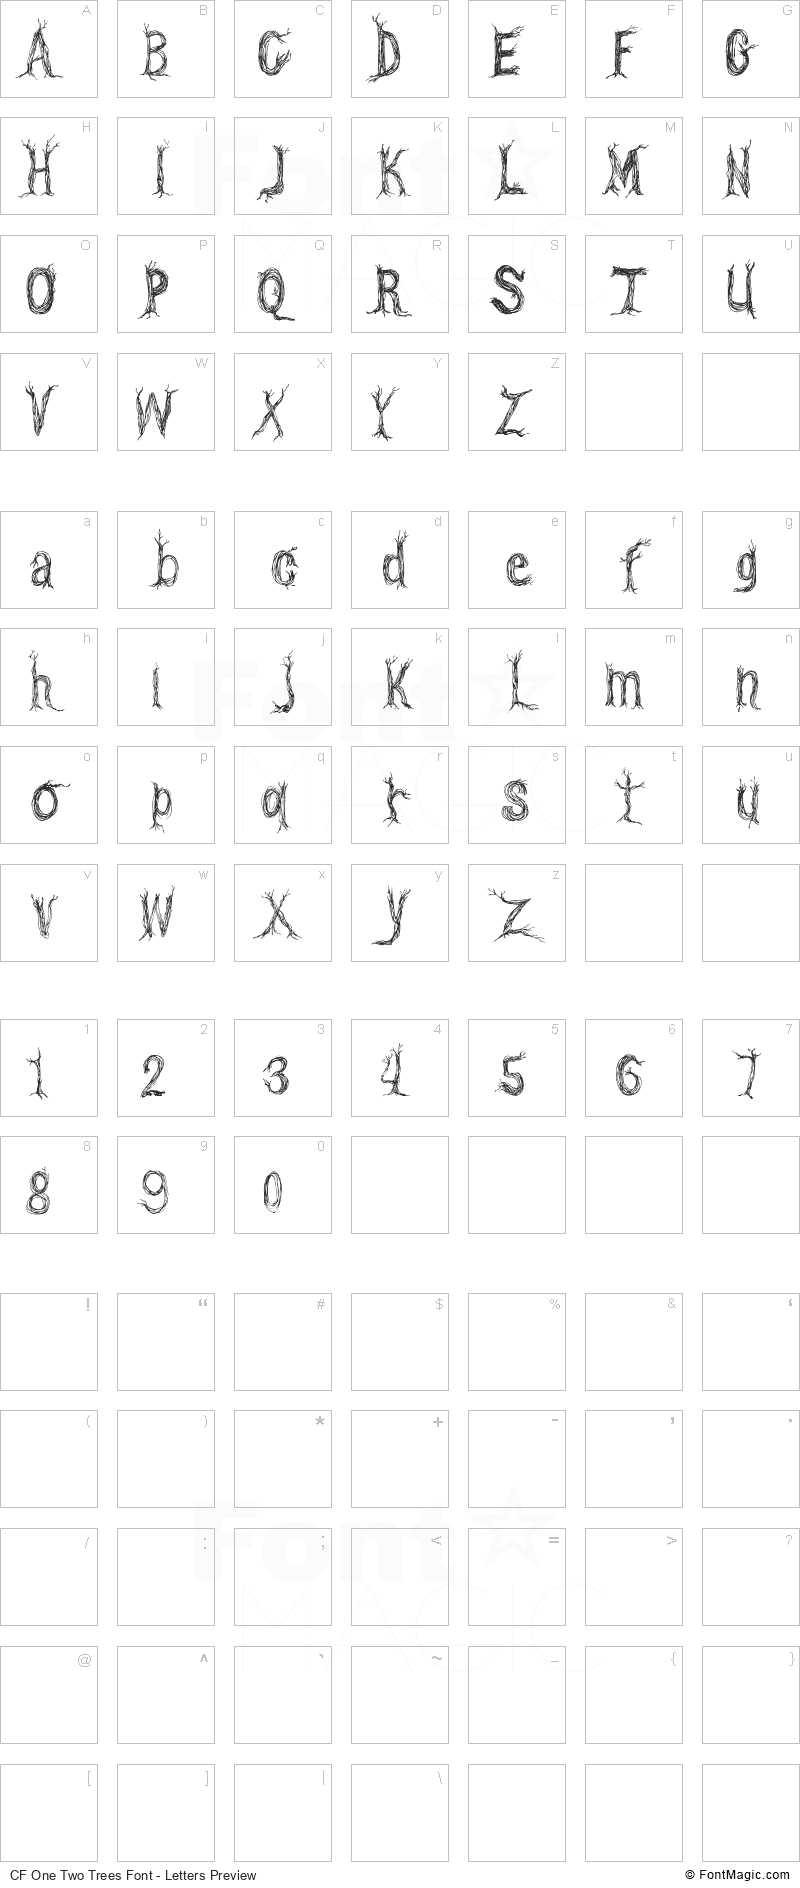 CF One Two Trees Font - All Latters Preview Chart